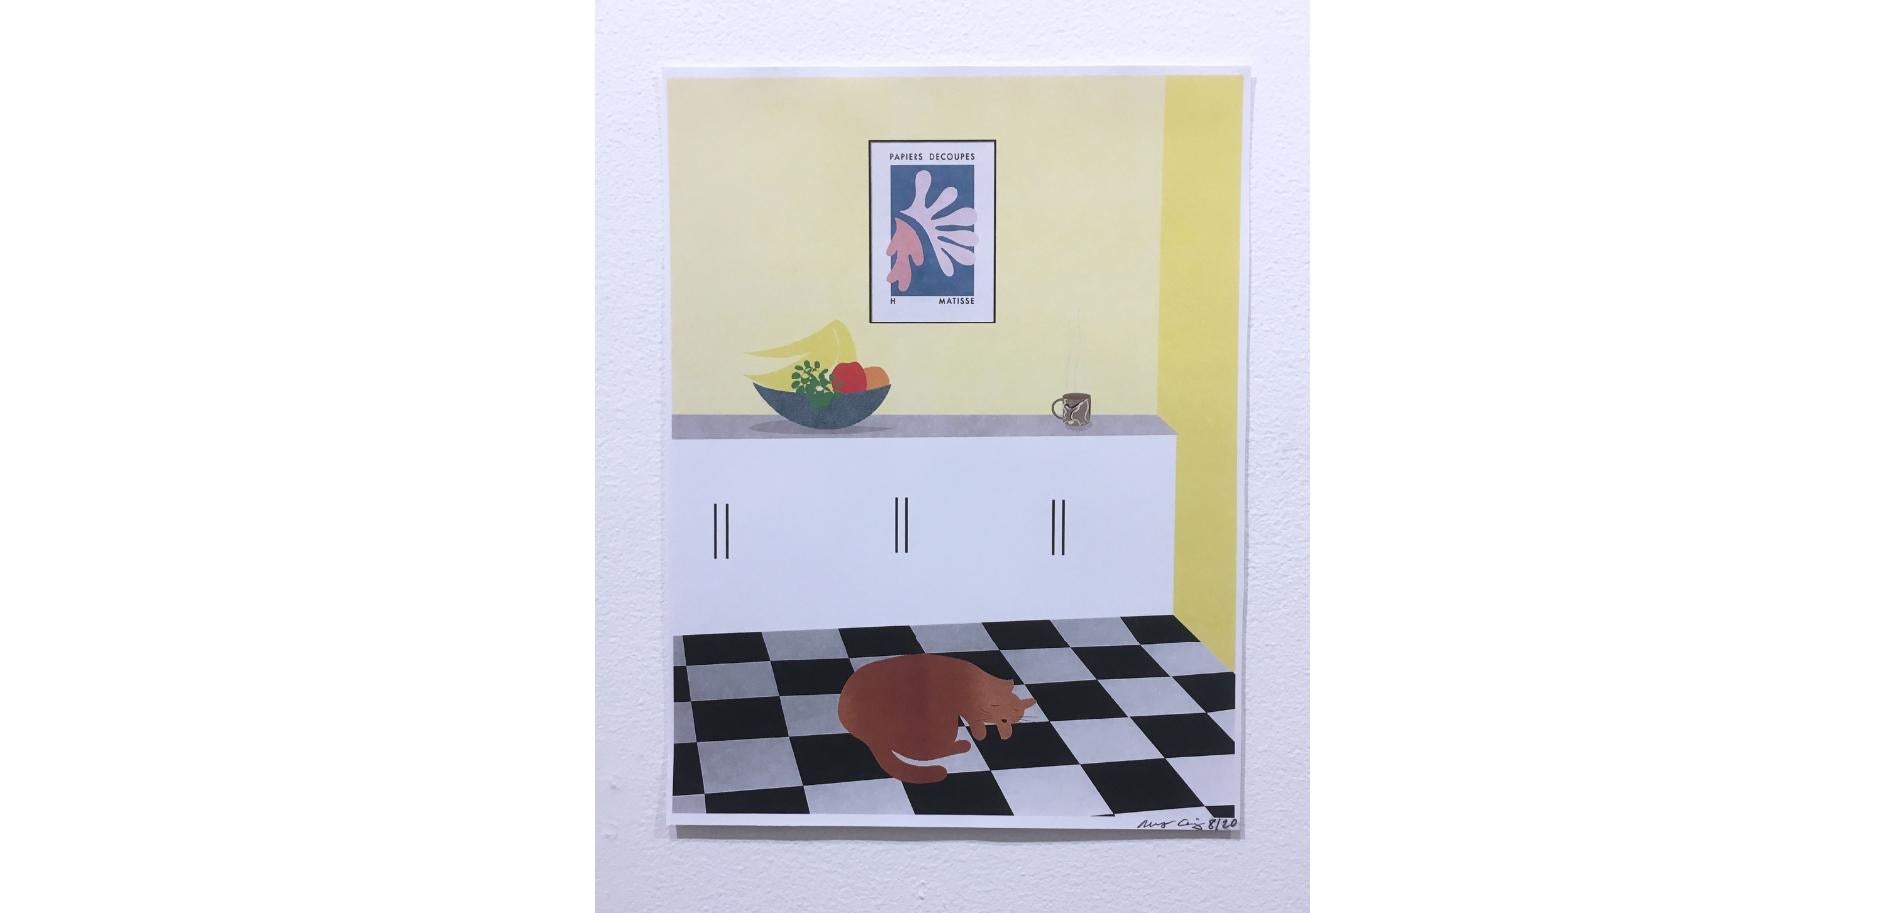 Kitchen Cat, Digital Painting Print, Interiors, Still Life, Fruit Bowl, Yellow  For Sale 2